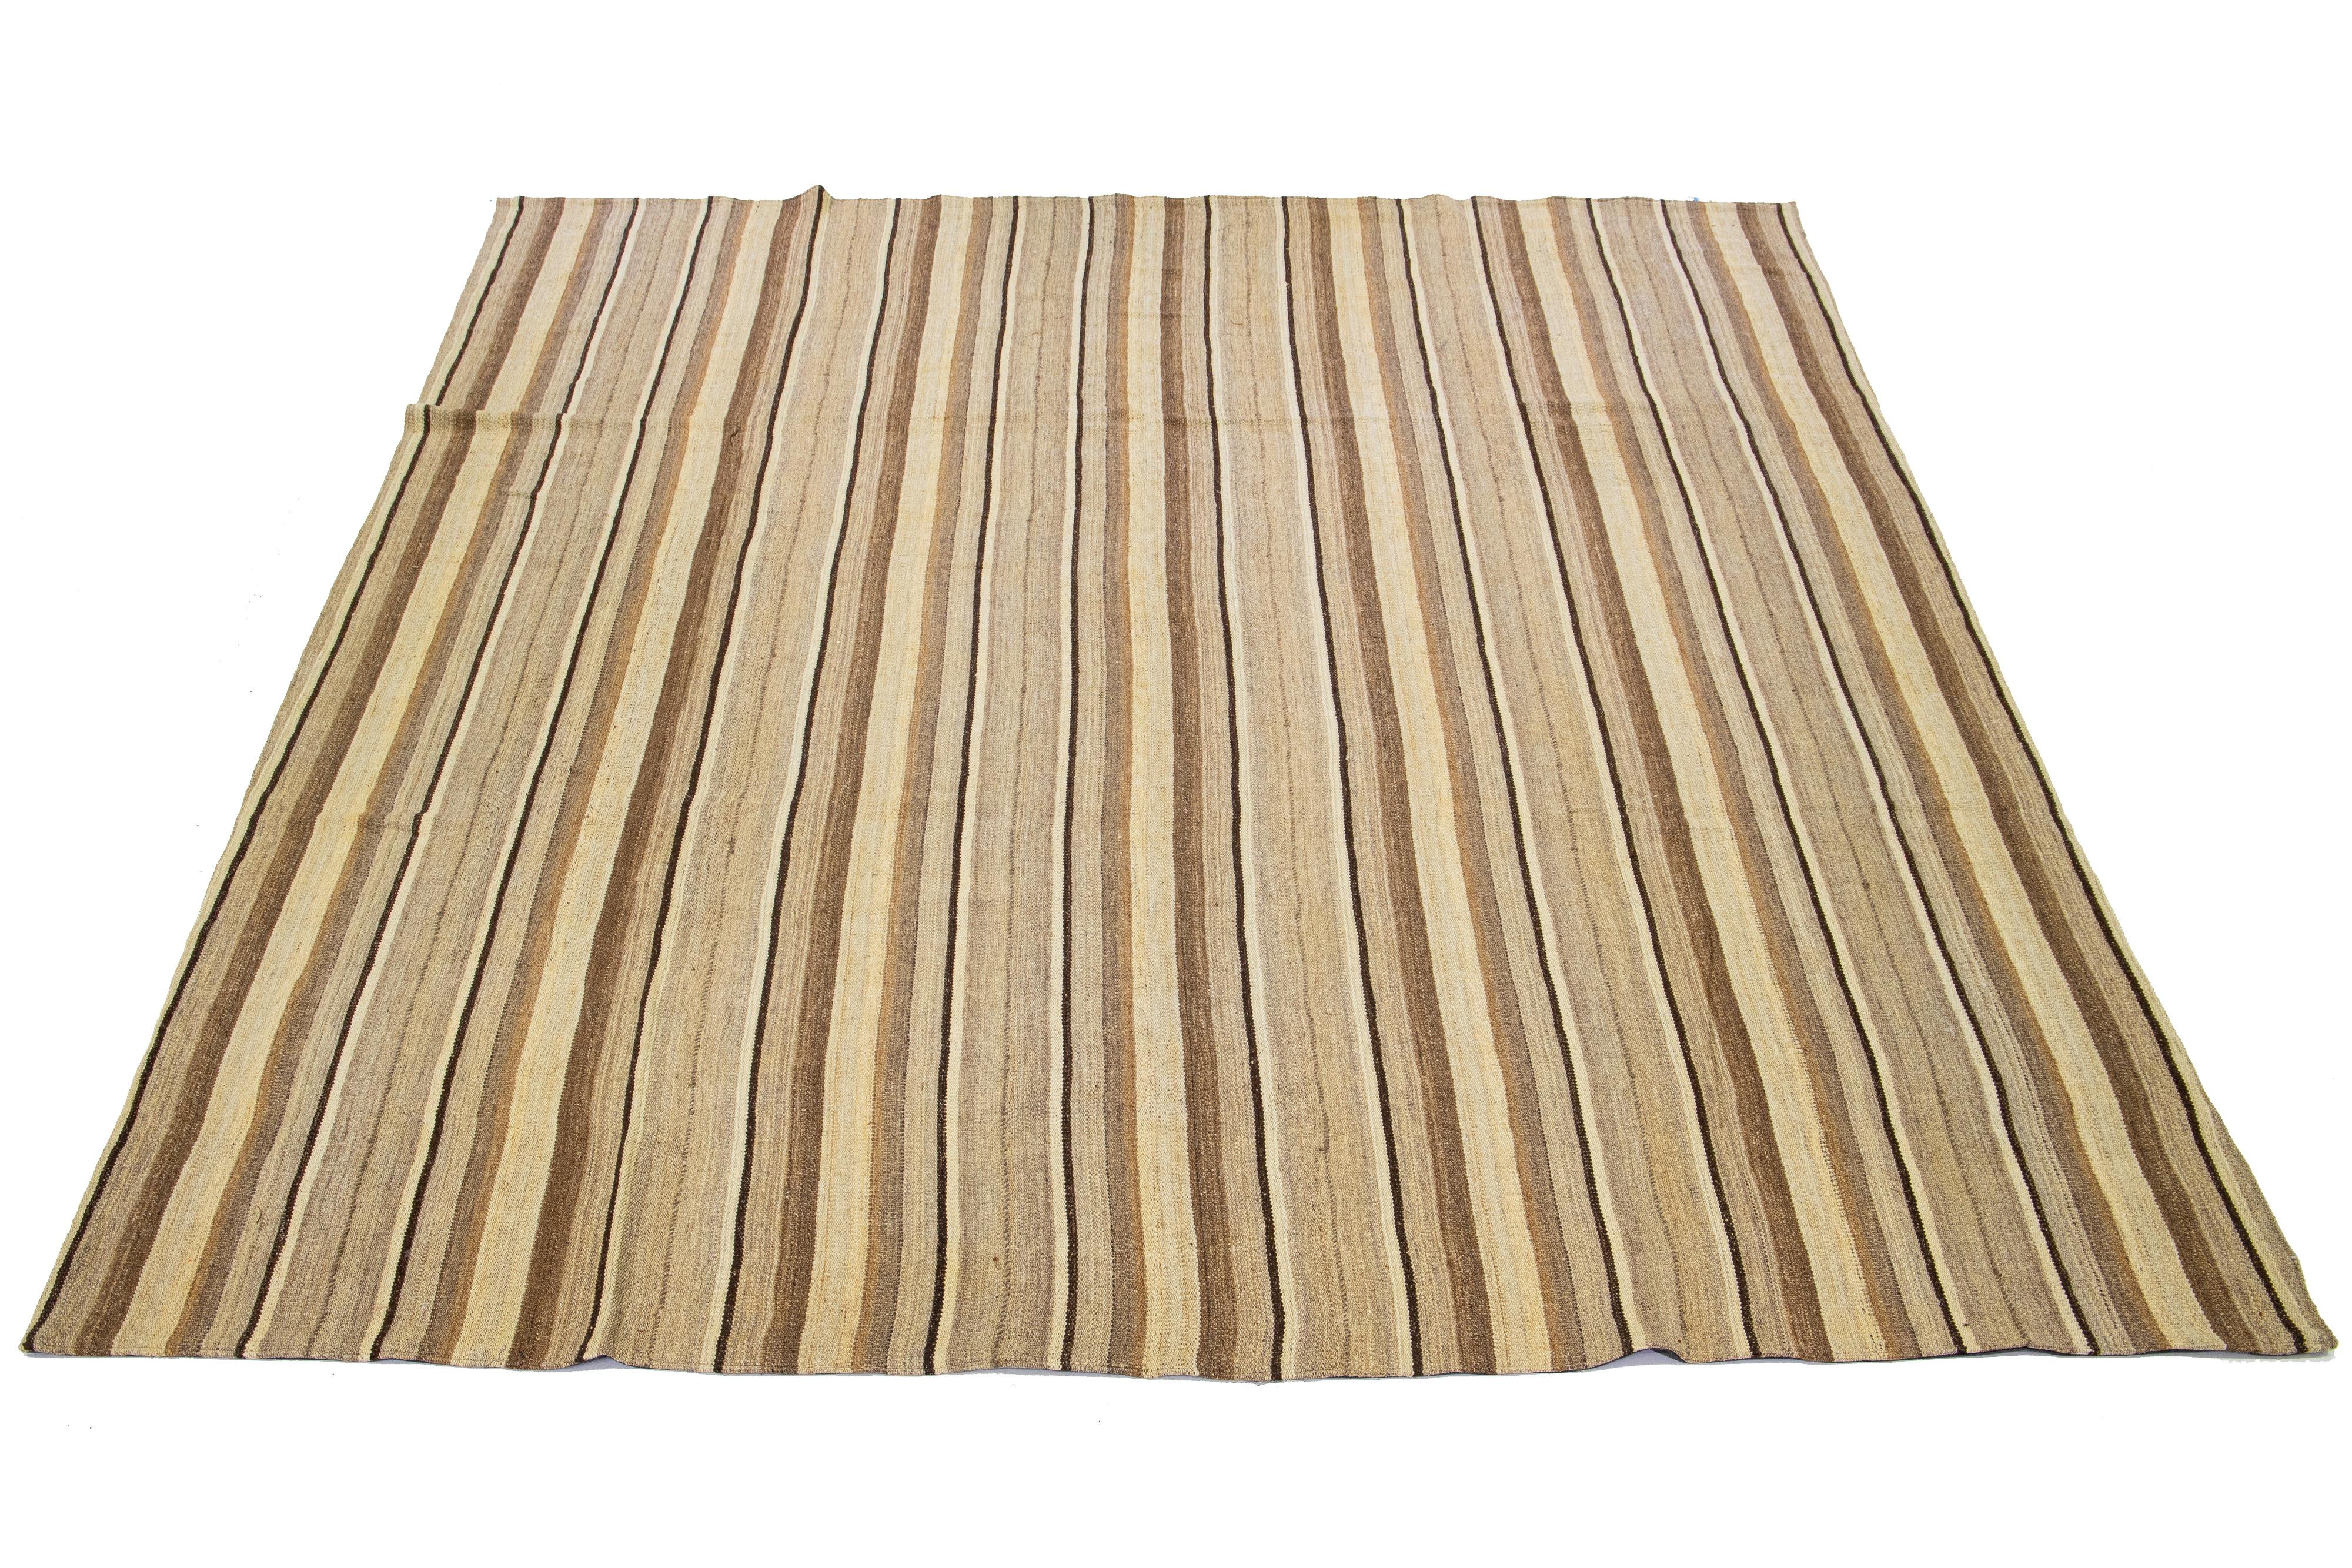 This Indian rug showcases a contemporary Kilim flatweave style crafted from wool. The rug exhibits an elegant striped pattern in shades of beige and brown.

This rug measures 10'9